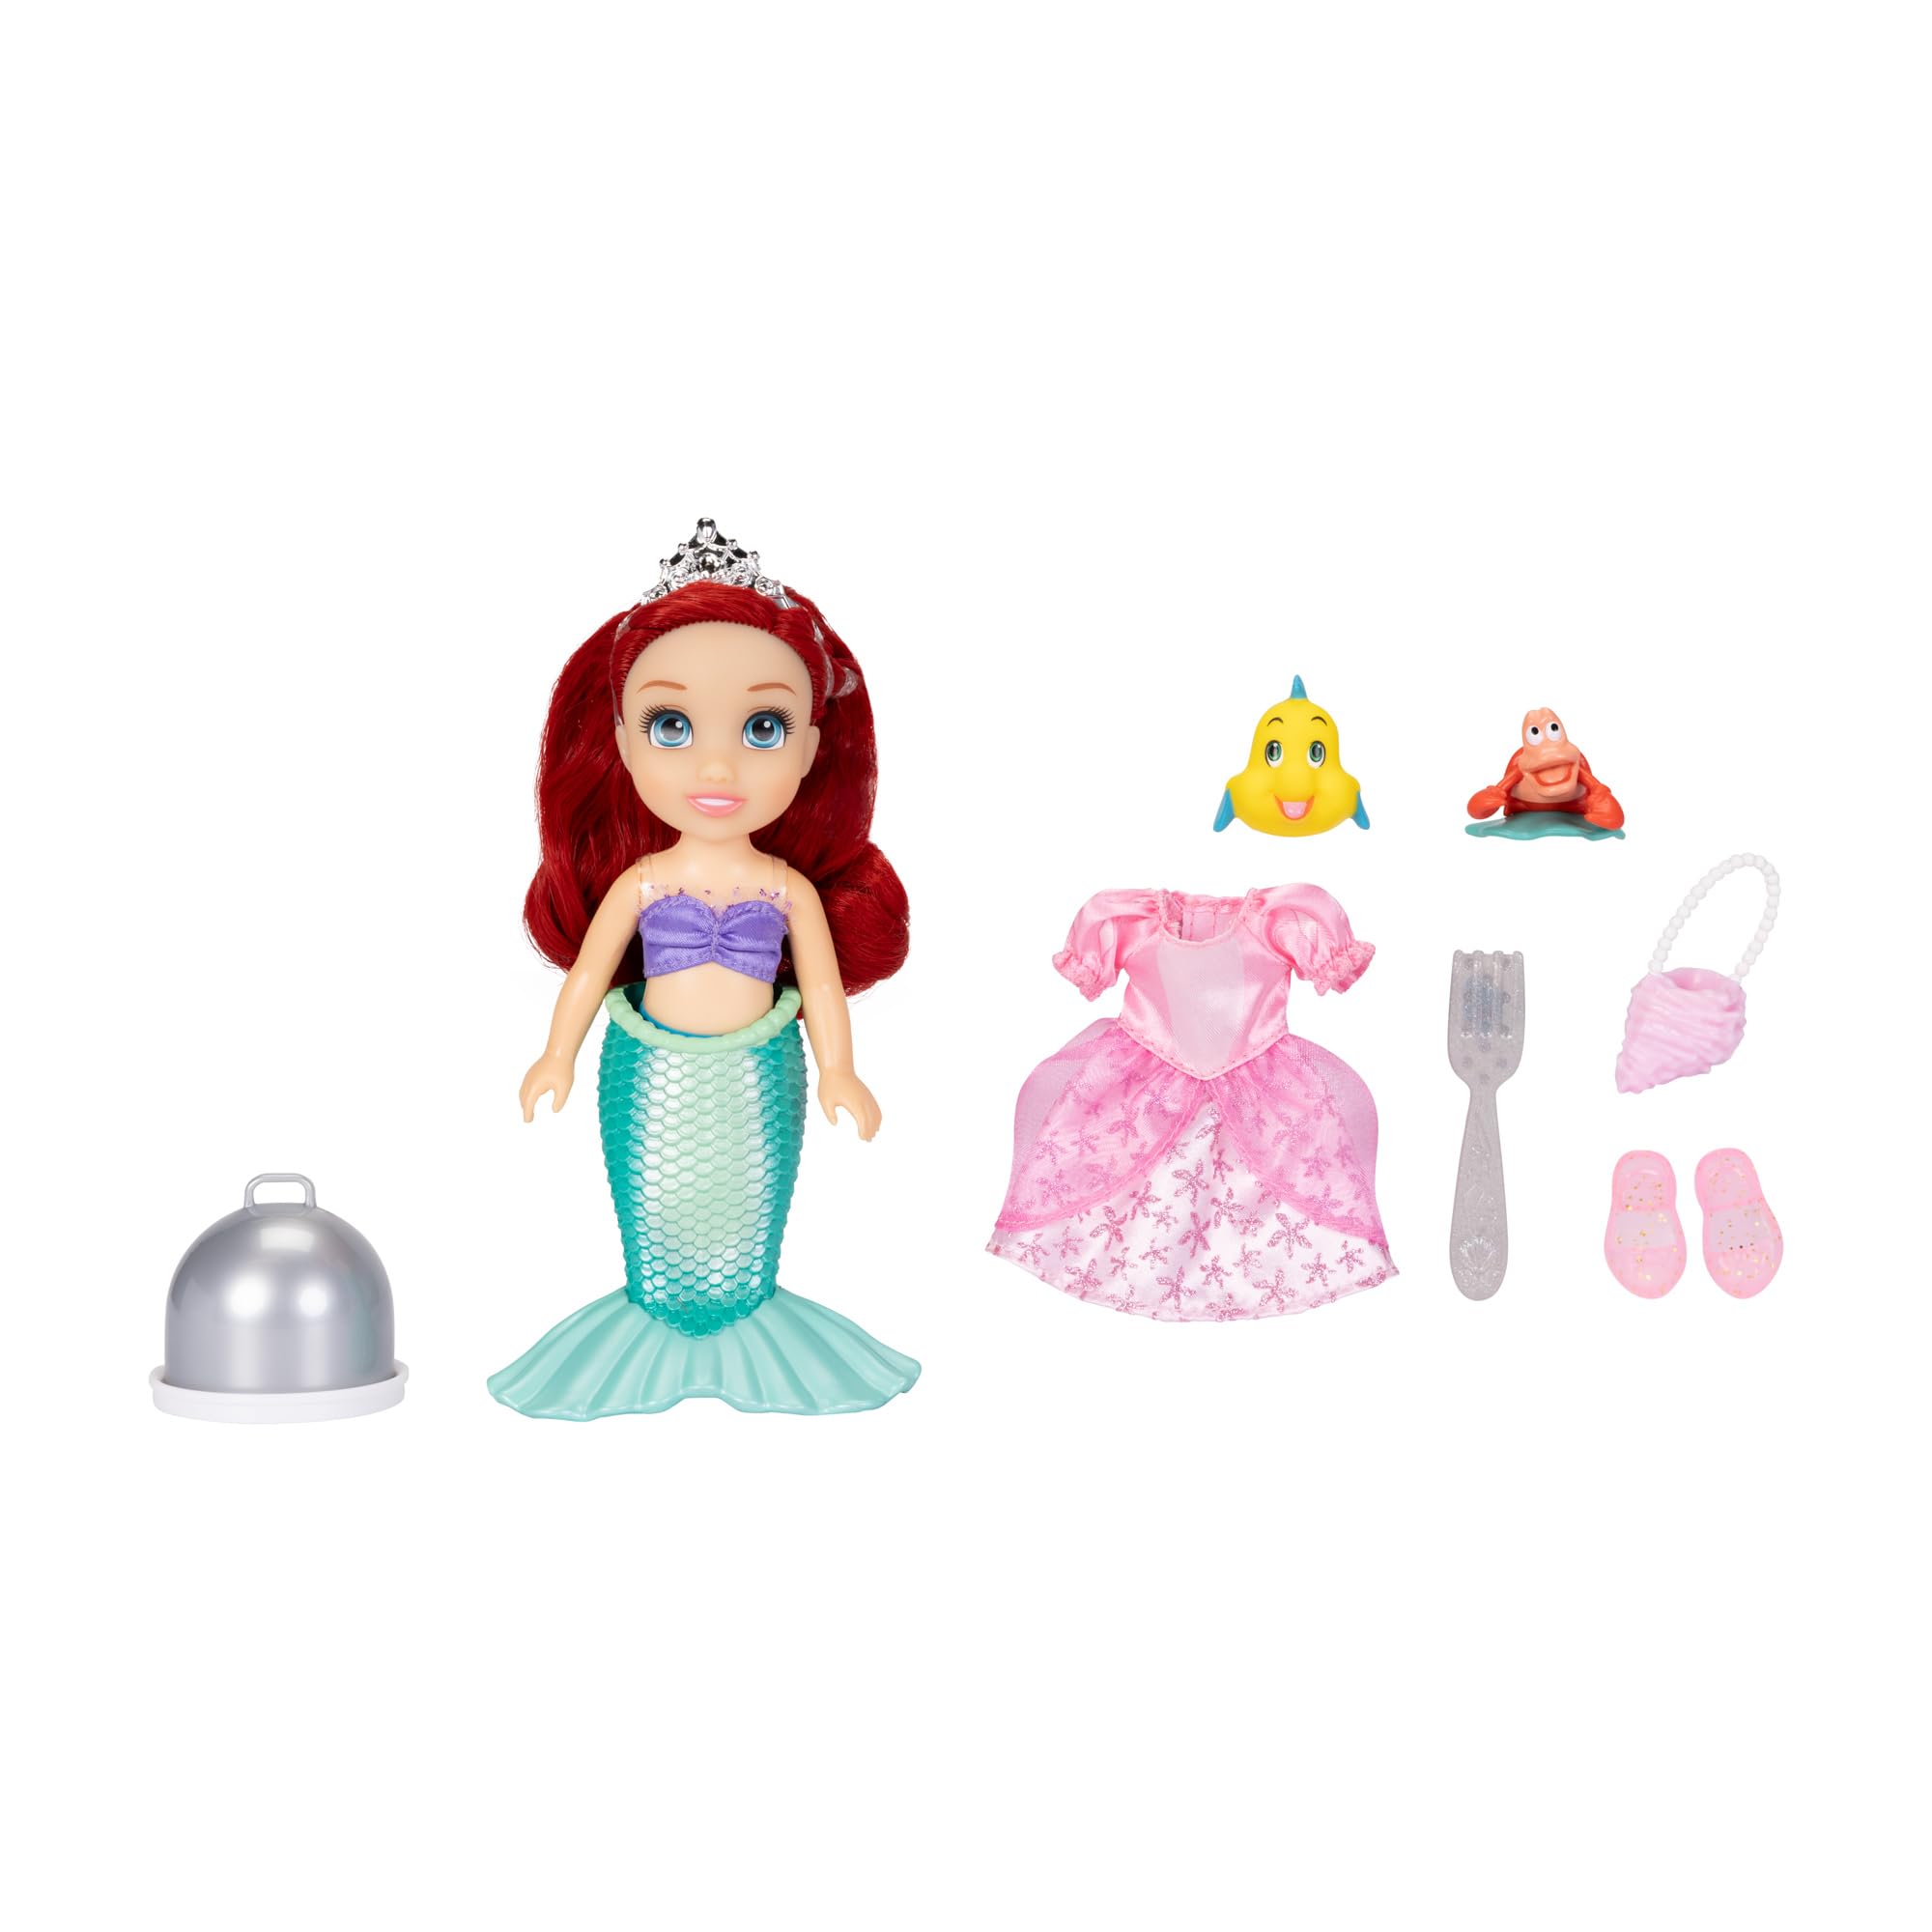 Disney Princess Ariel Doll Sea to Land Petite Ariel Doll with Sebastian & Flounder, in Mermaid Tail and Pink Dress Fashions